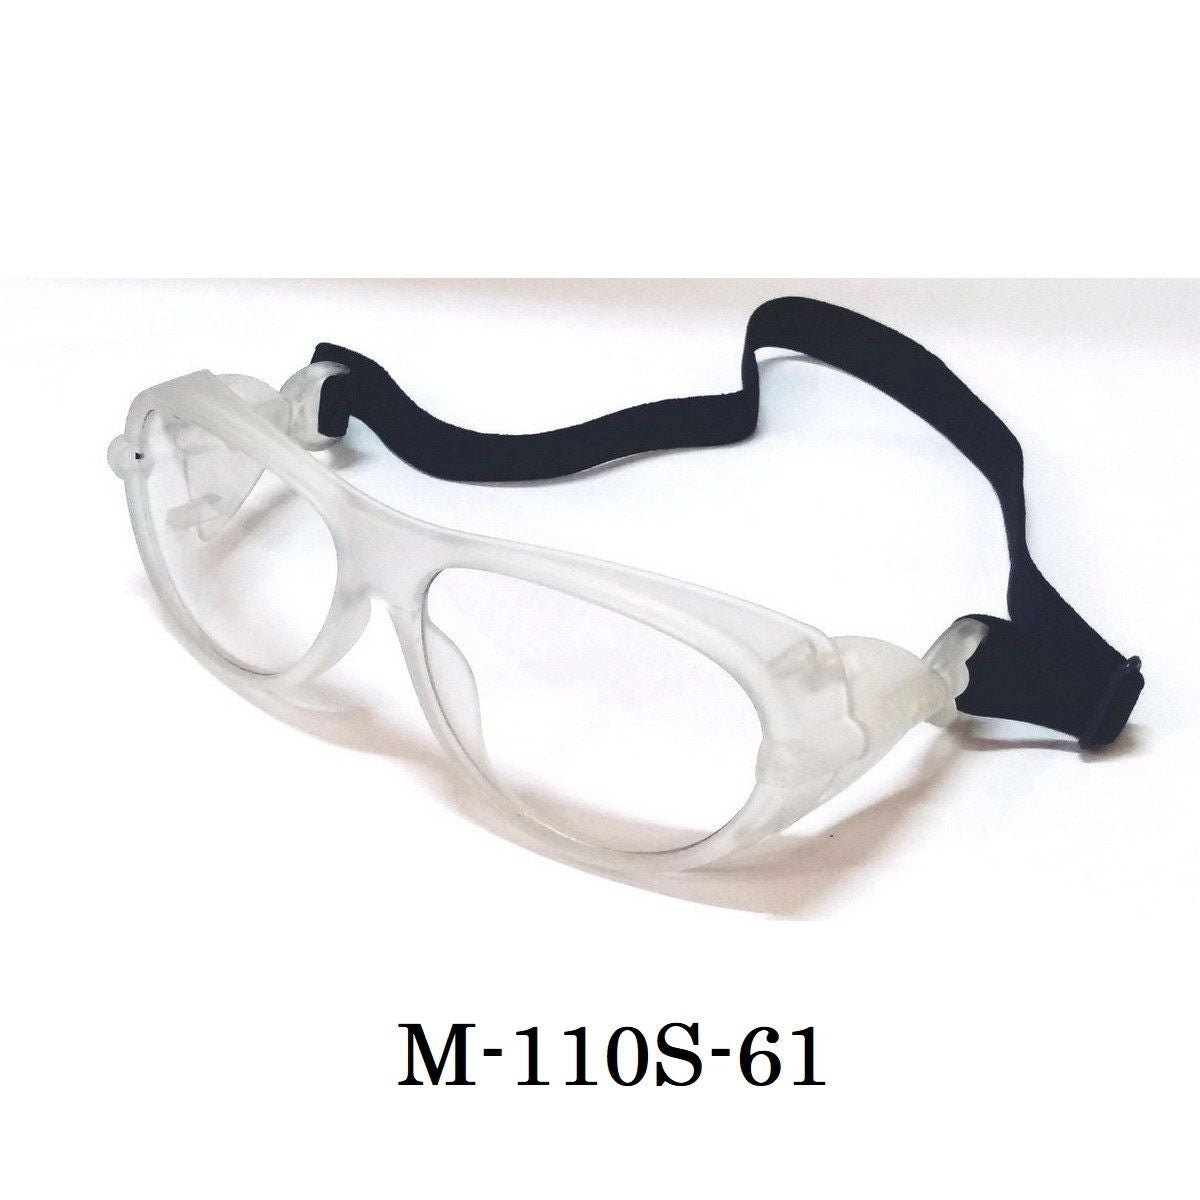 Clear Frame Clear Lens Prescription Biker Cycling Driving Glasses Sunglasses with Strap